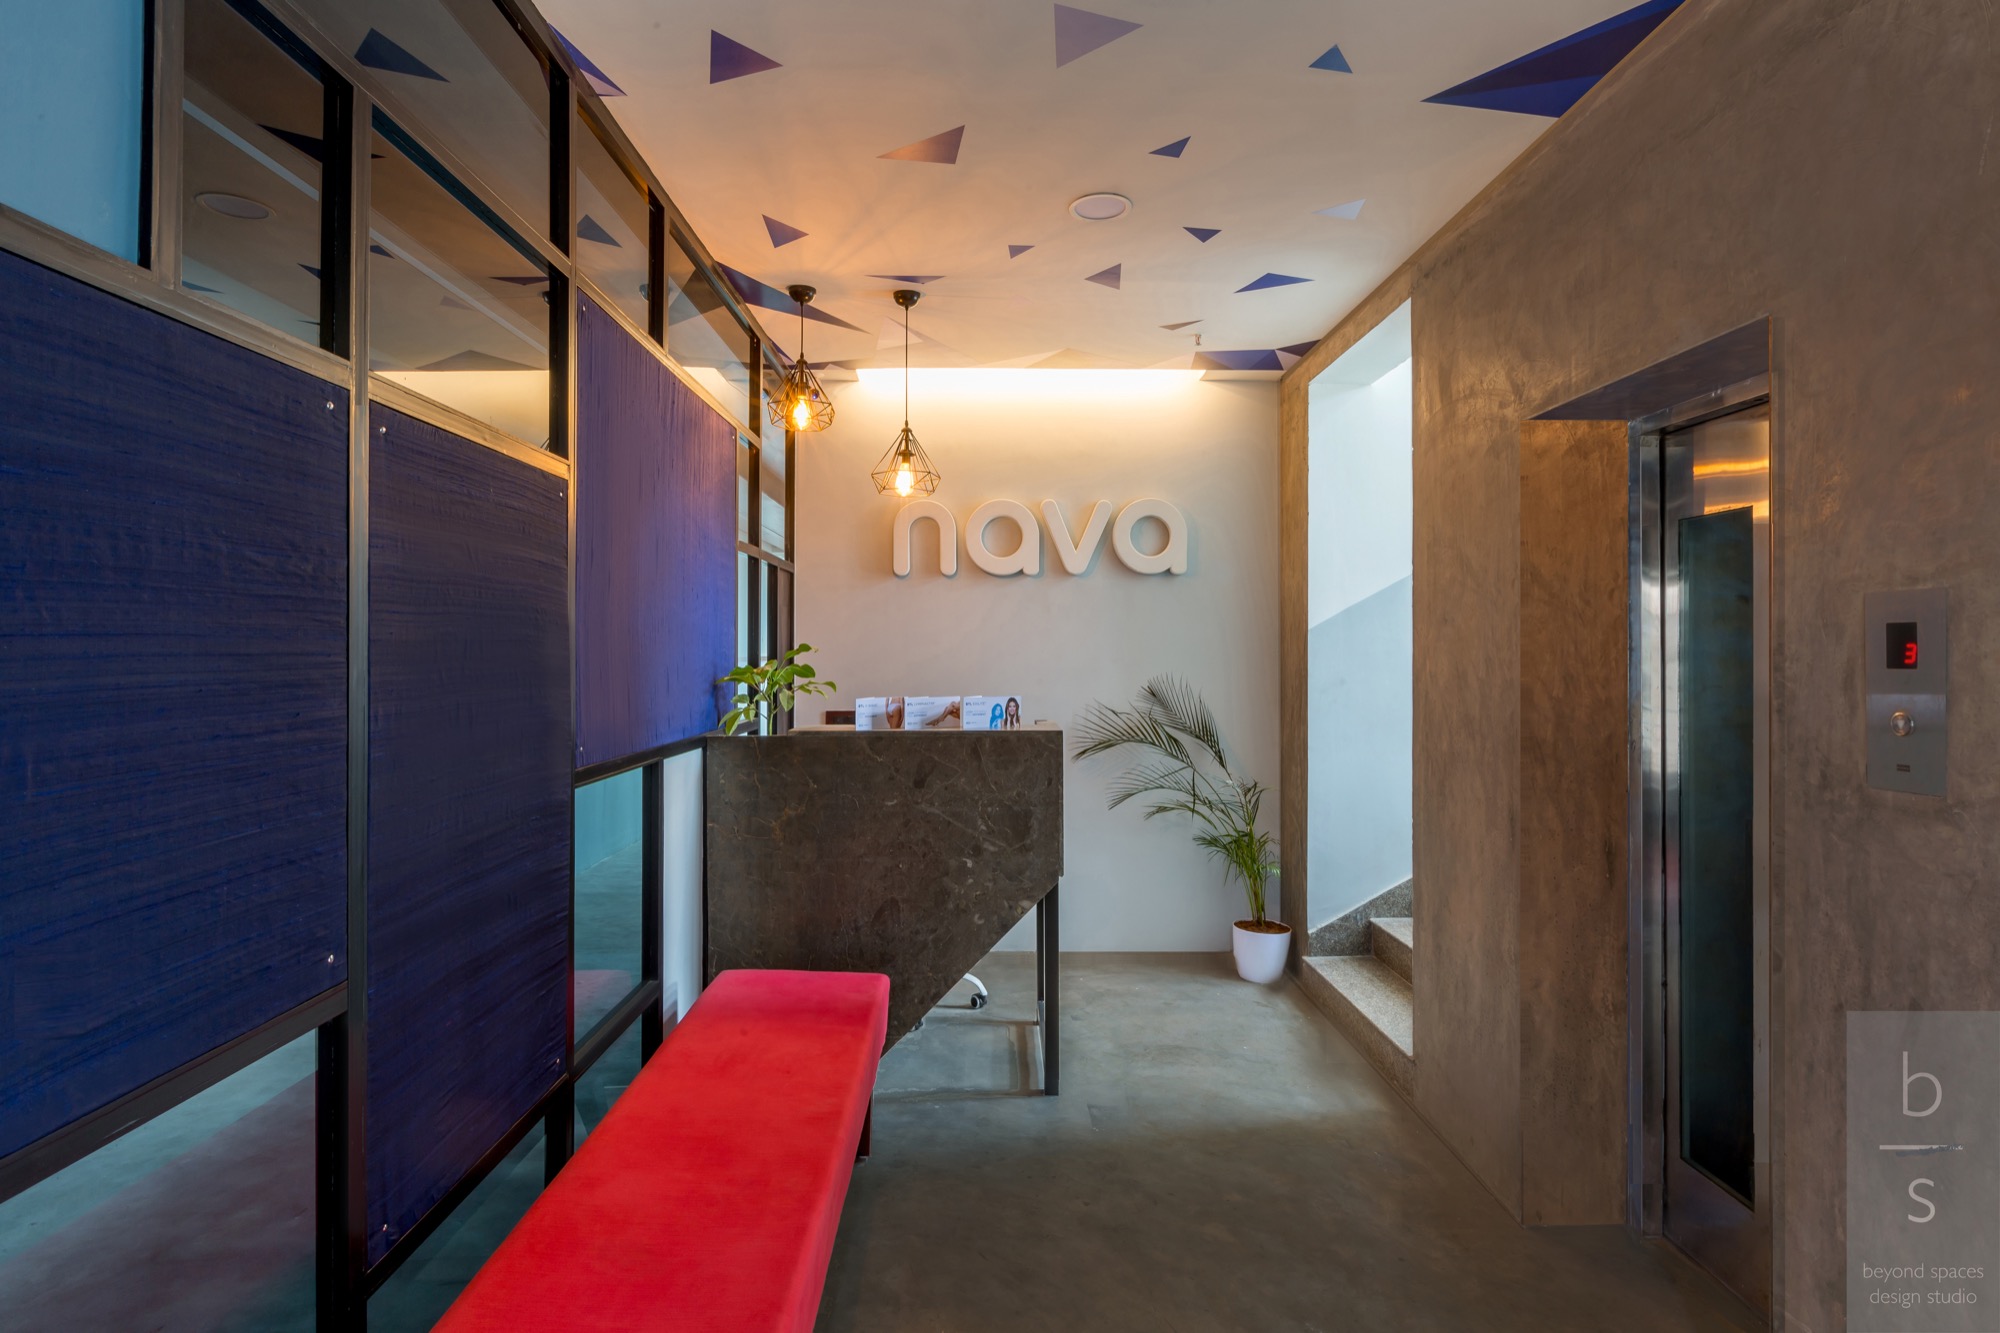 Nava Clinic at Hyderabad, An Earthy Oasis of Wellness, designed by Beyond Spaces Design Studio 4